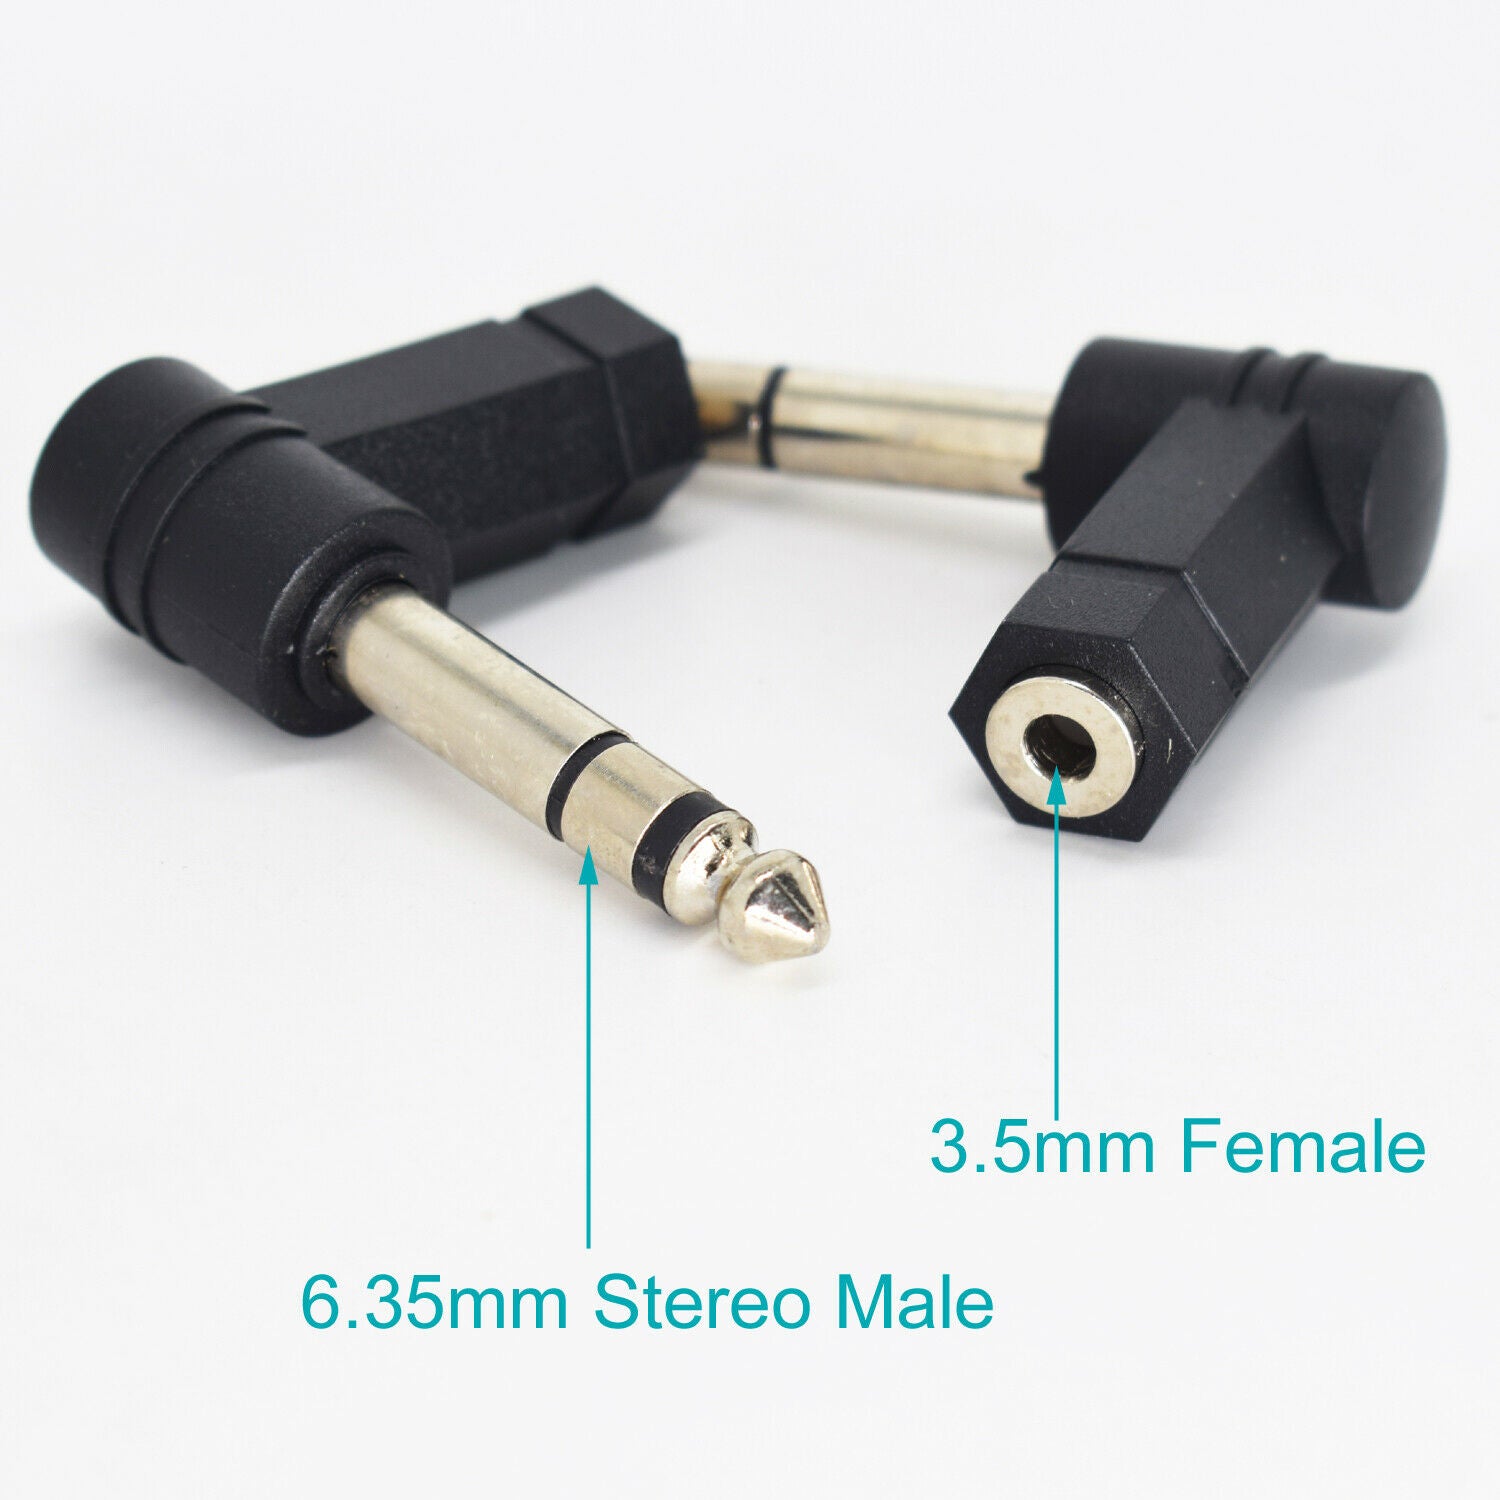 1pc 6.35mm 1/4" Stereo Male to 3.5mm 1/8" Female Right Angle Audio MIC Adapter